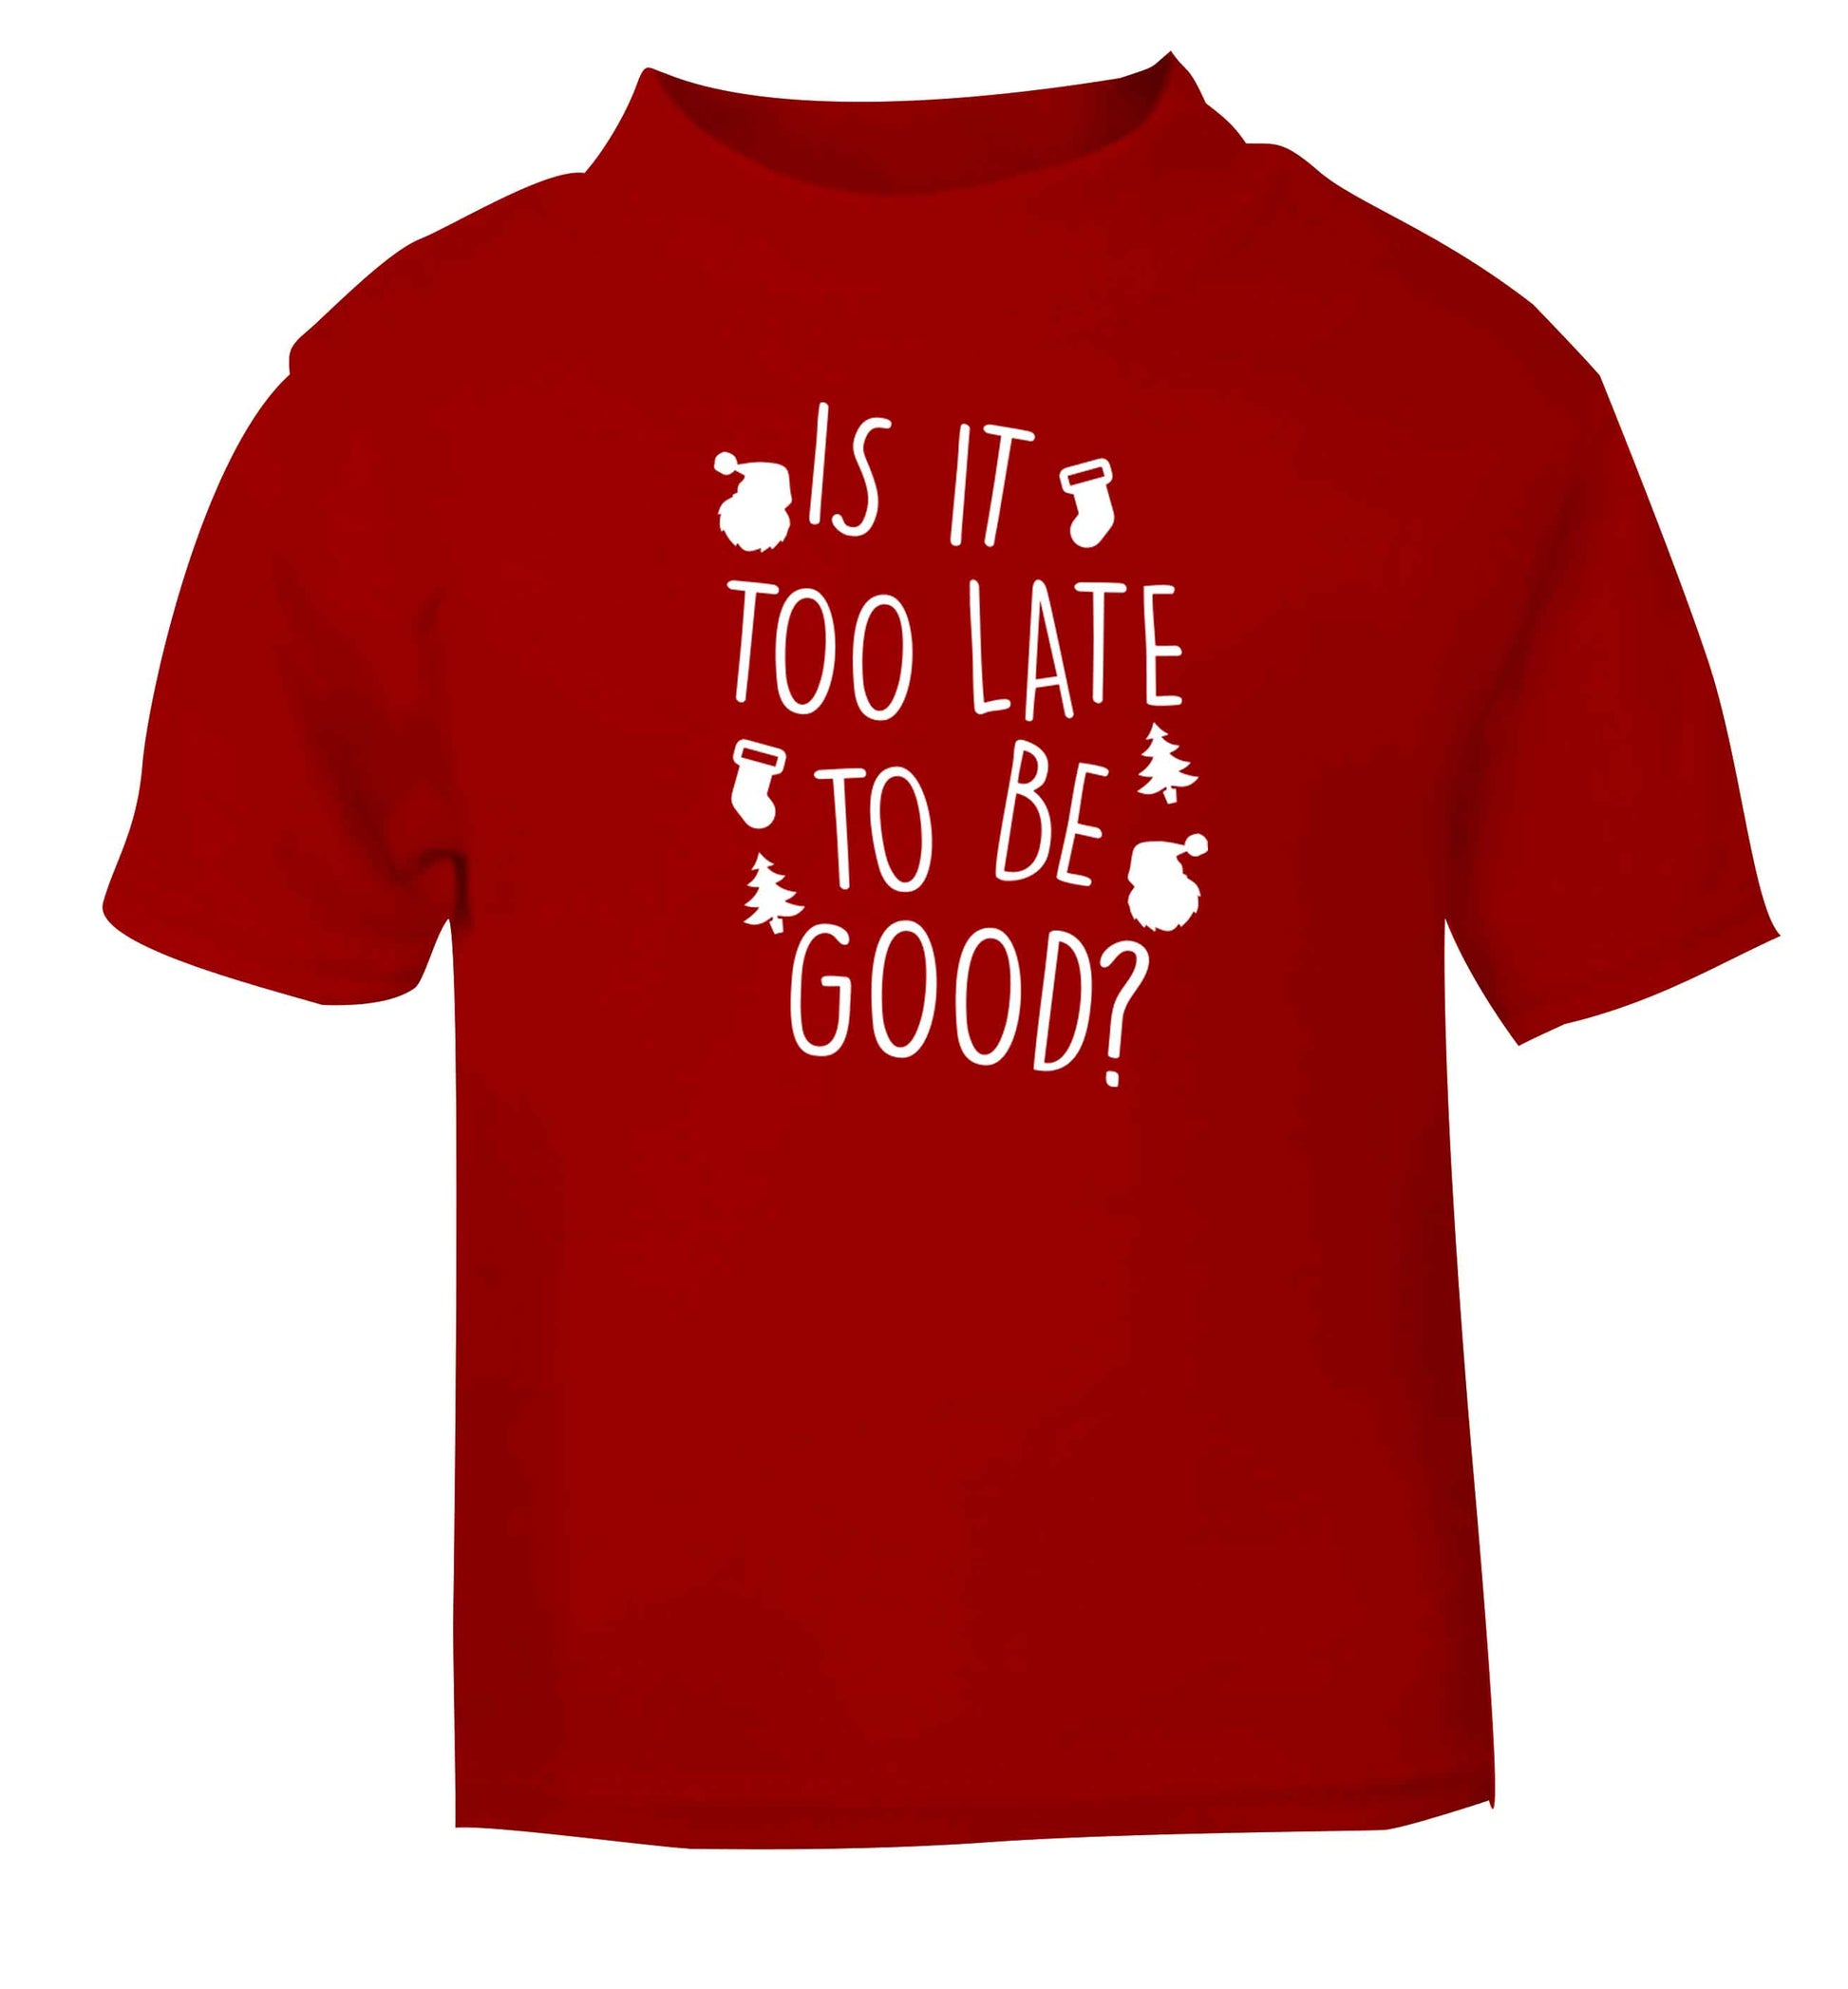 Too Late to be Good red baby toddler Tshirt 2 Years